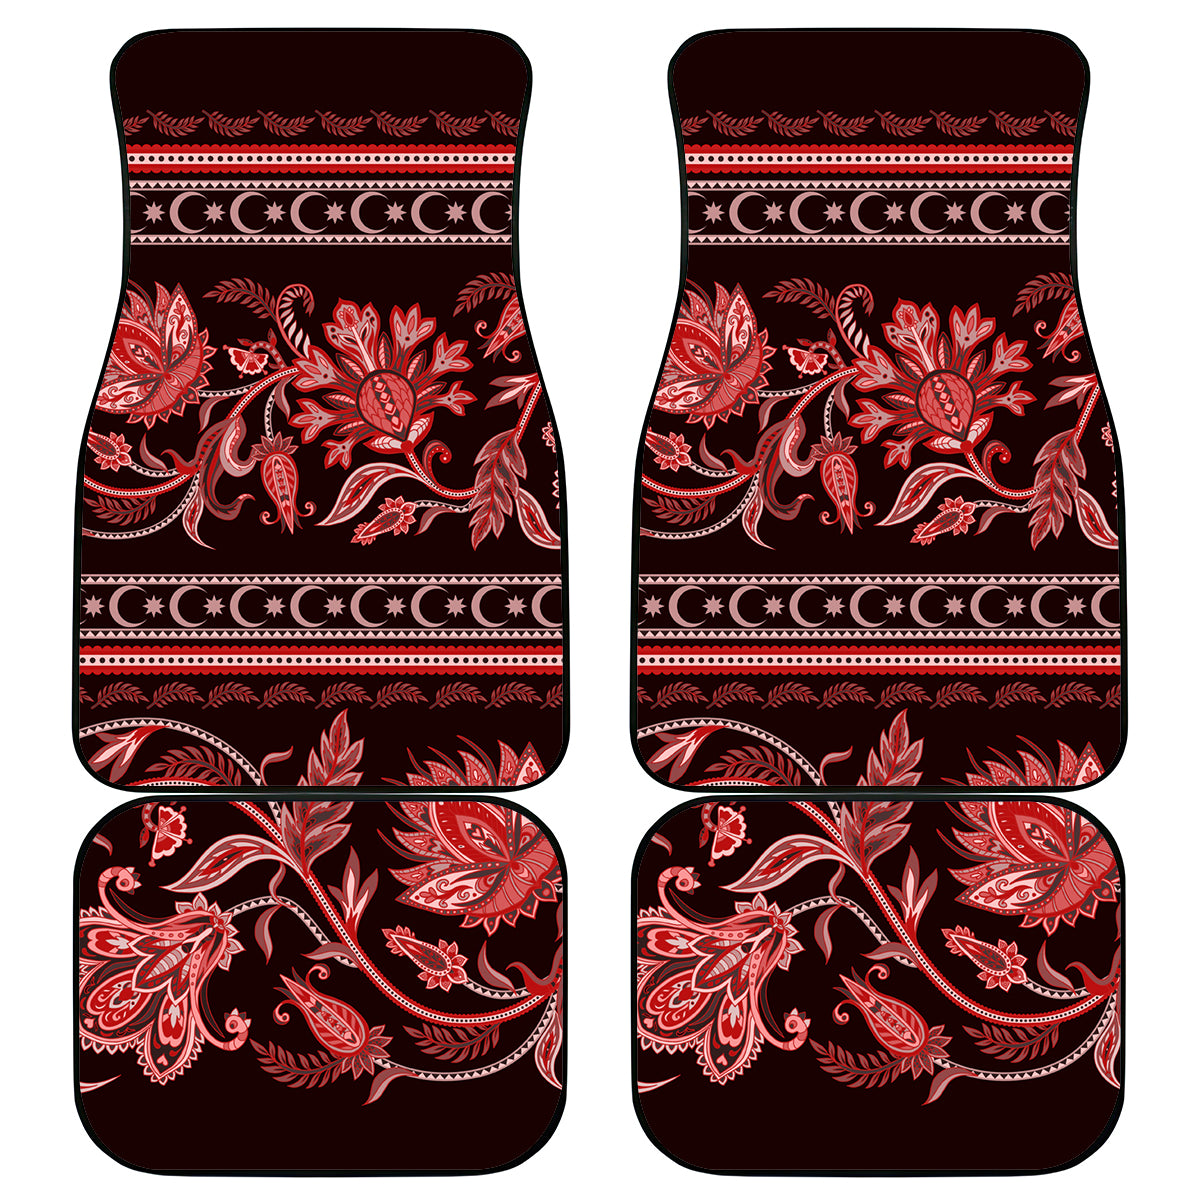 azerbaijan-car-mats-traditional-pattern-ornament-with-flowers-buta-red